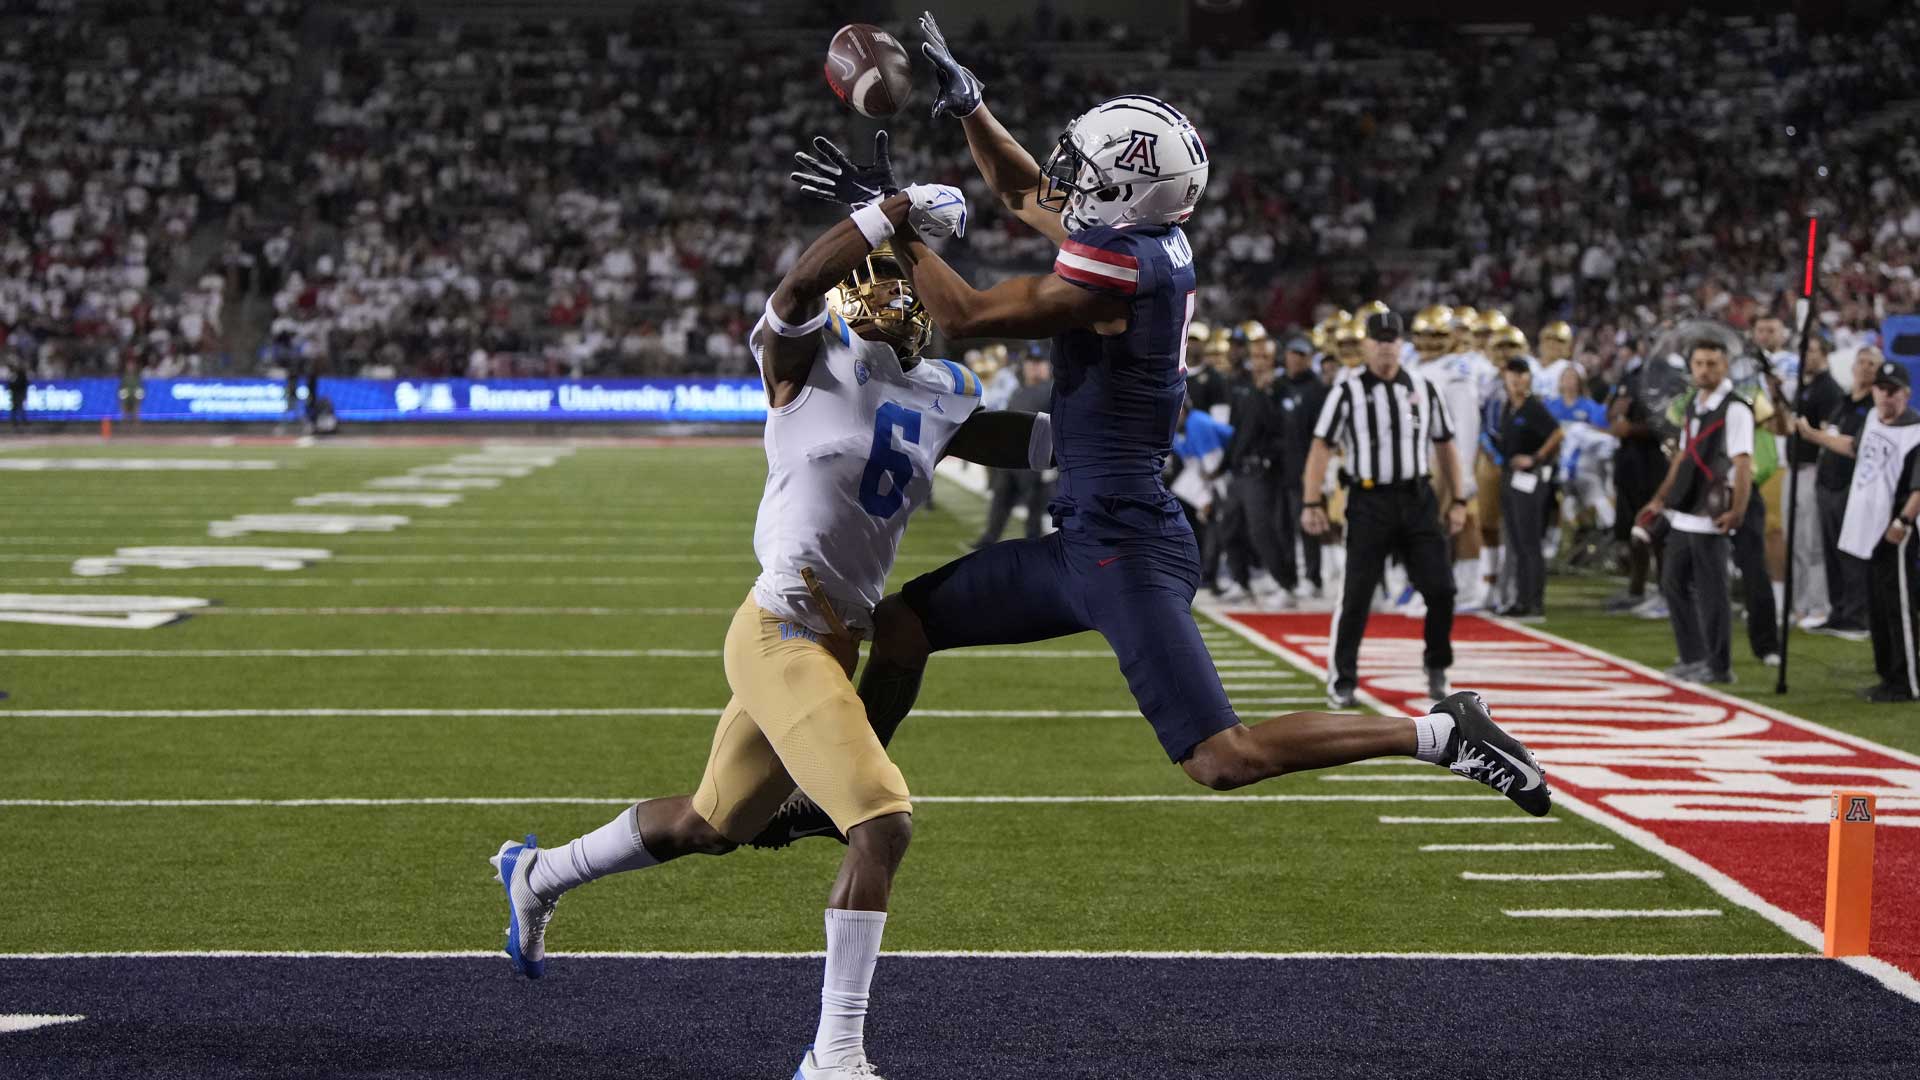 Arizona wide receiver Tetairoa McMillan (4), right, catches a touchdown pass in front of UCLA defensive back John Humphrey during the second half of an NCAA college football game Saturday, Nov. 4, 2023, in Tucson, Ariz. One of the highest-rated recruits in program history two years ago, McMillan has lived up to the hype.